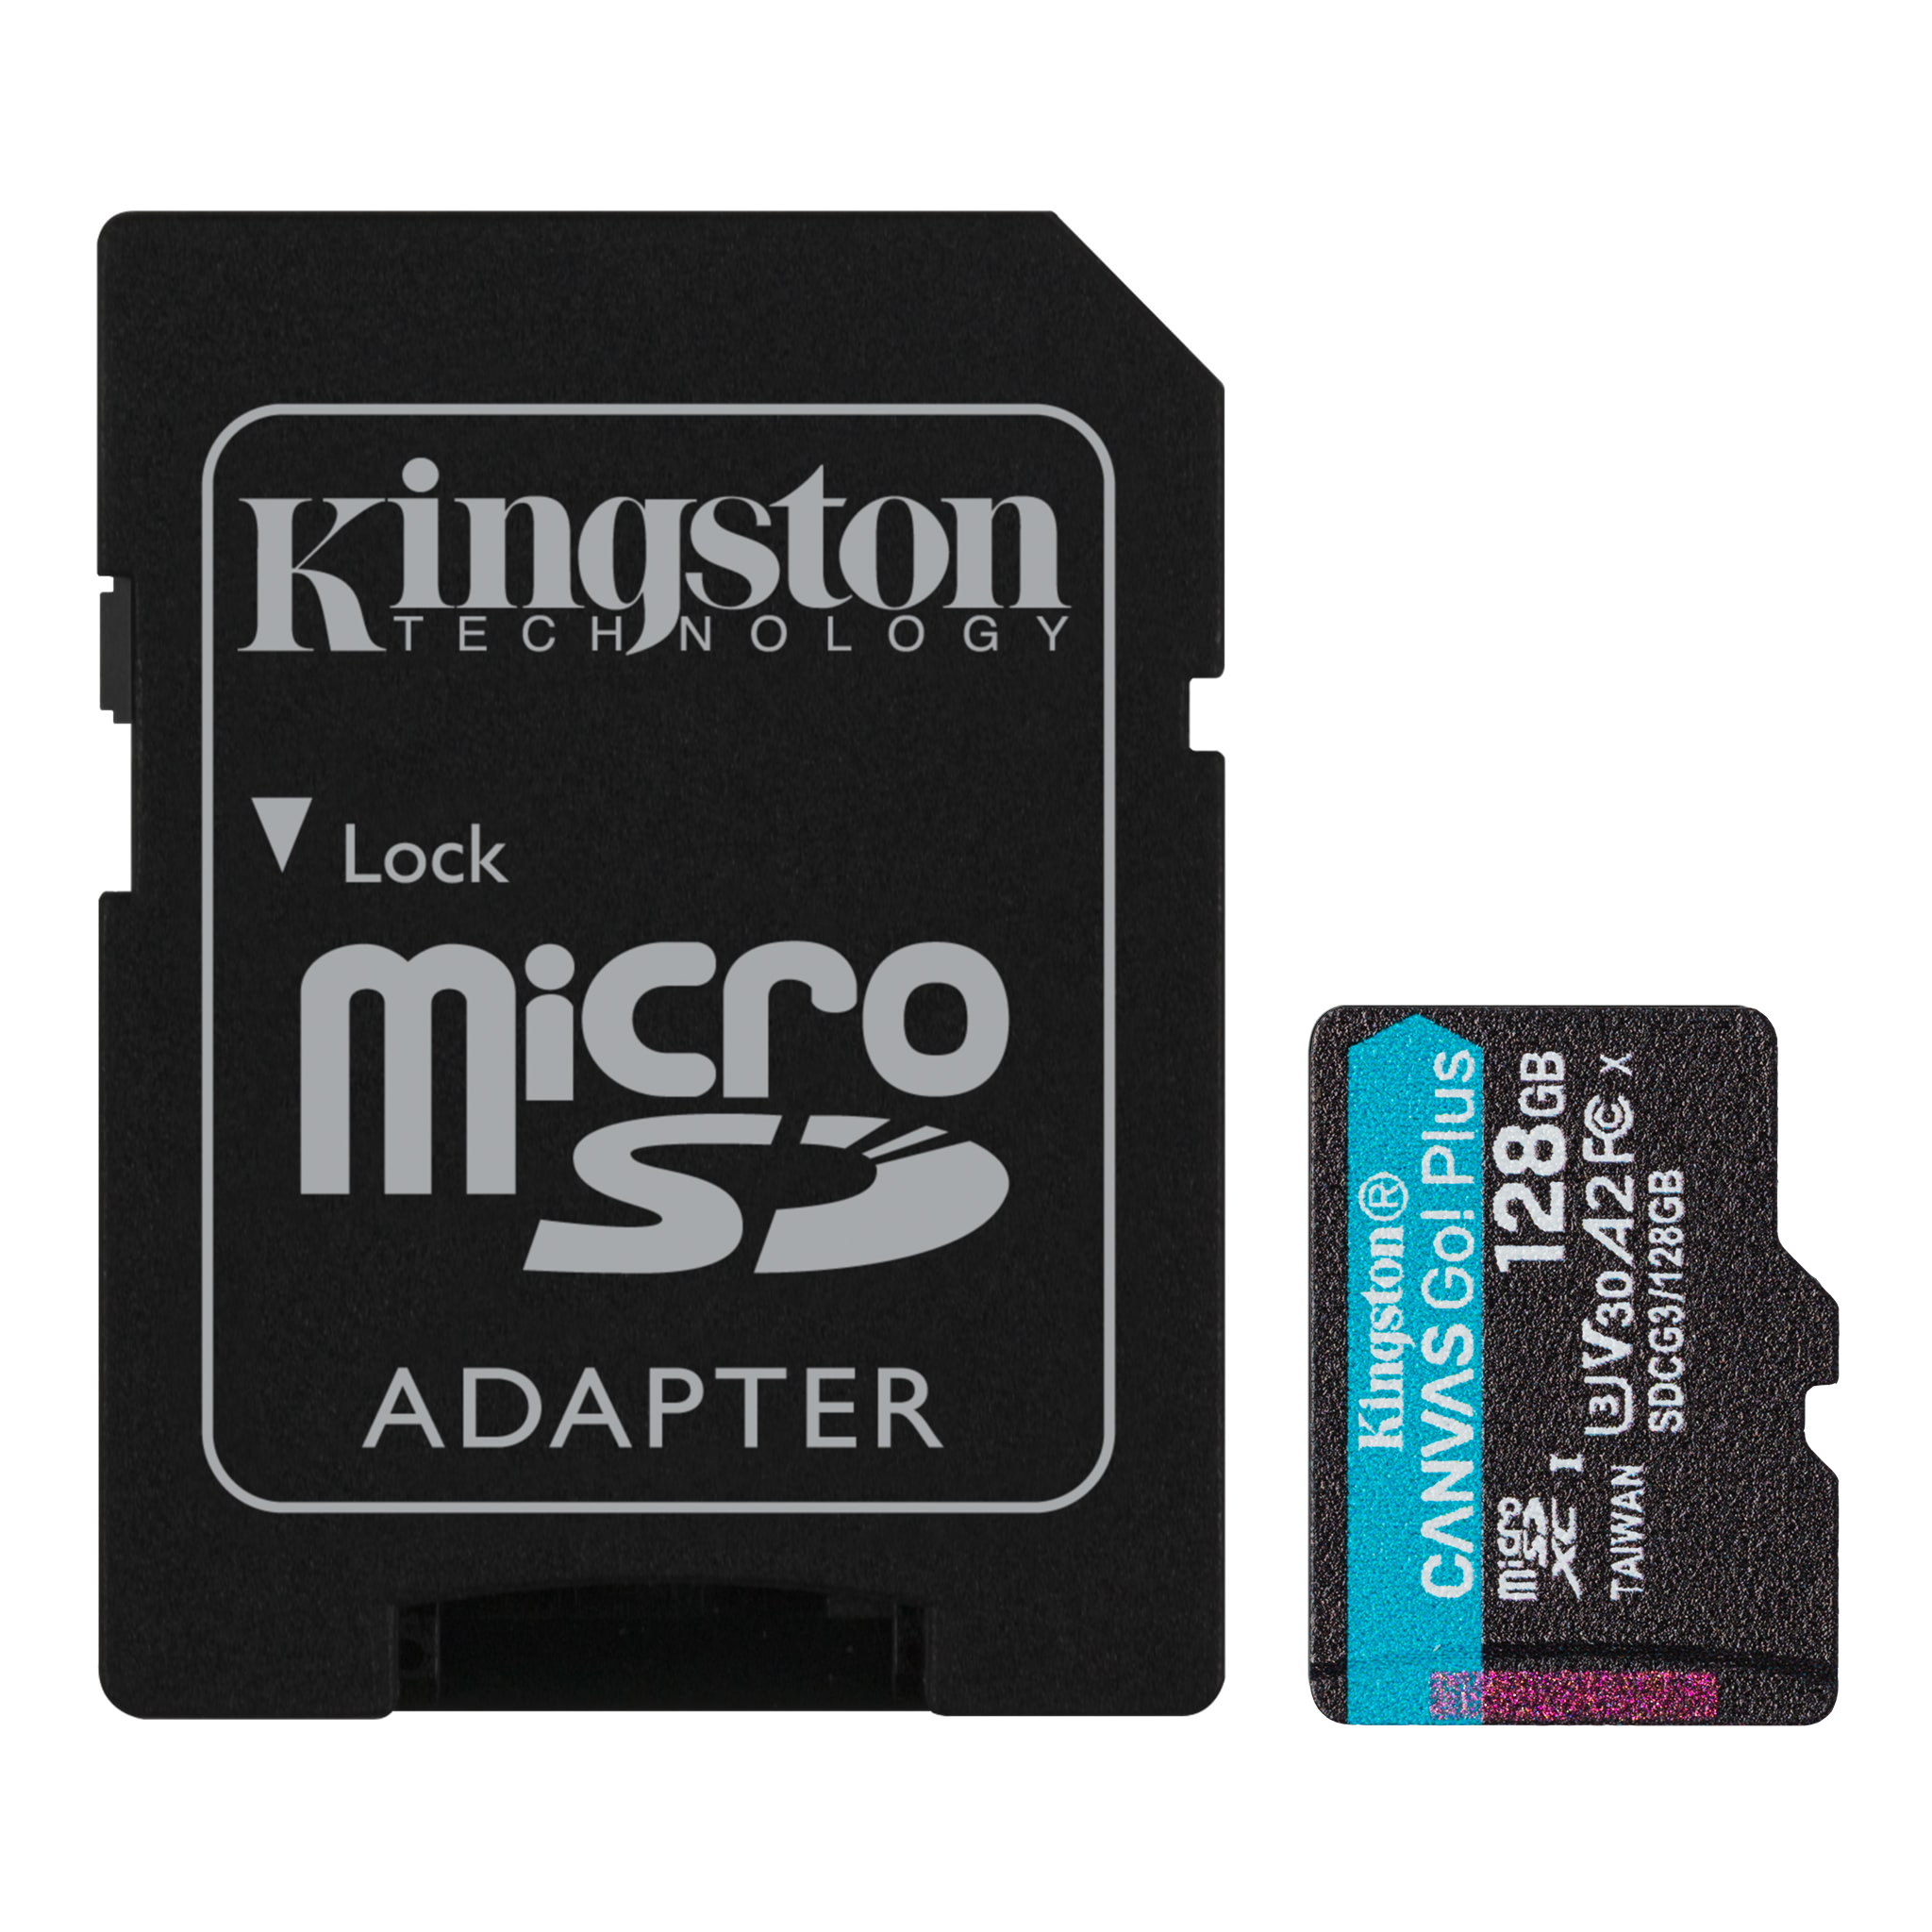 100MB/s Works with Kingston SanFlash Kingston 128GB React MicroSDXC for Palm Treo 500v with SD Adapter